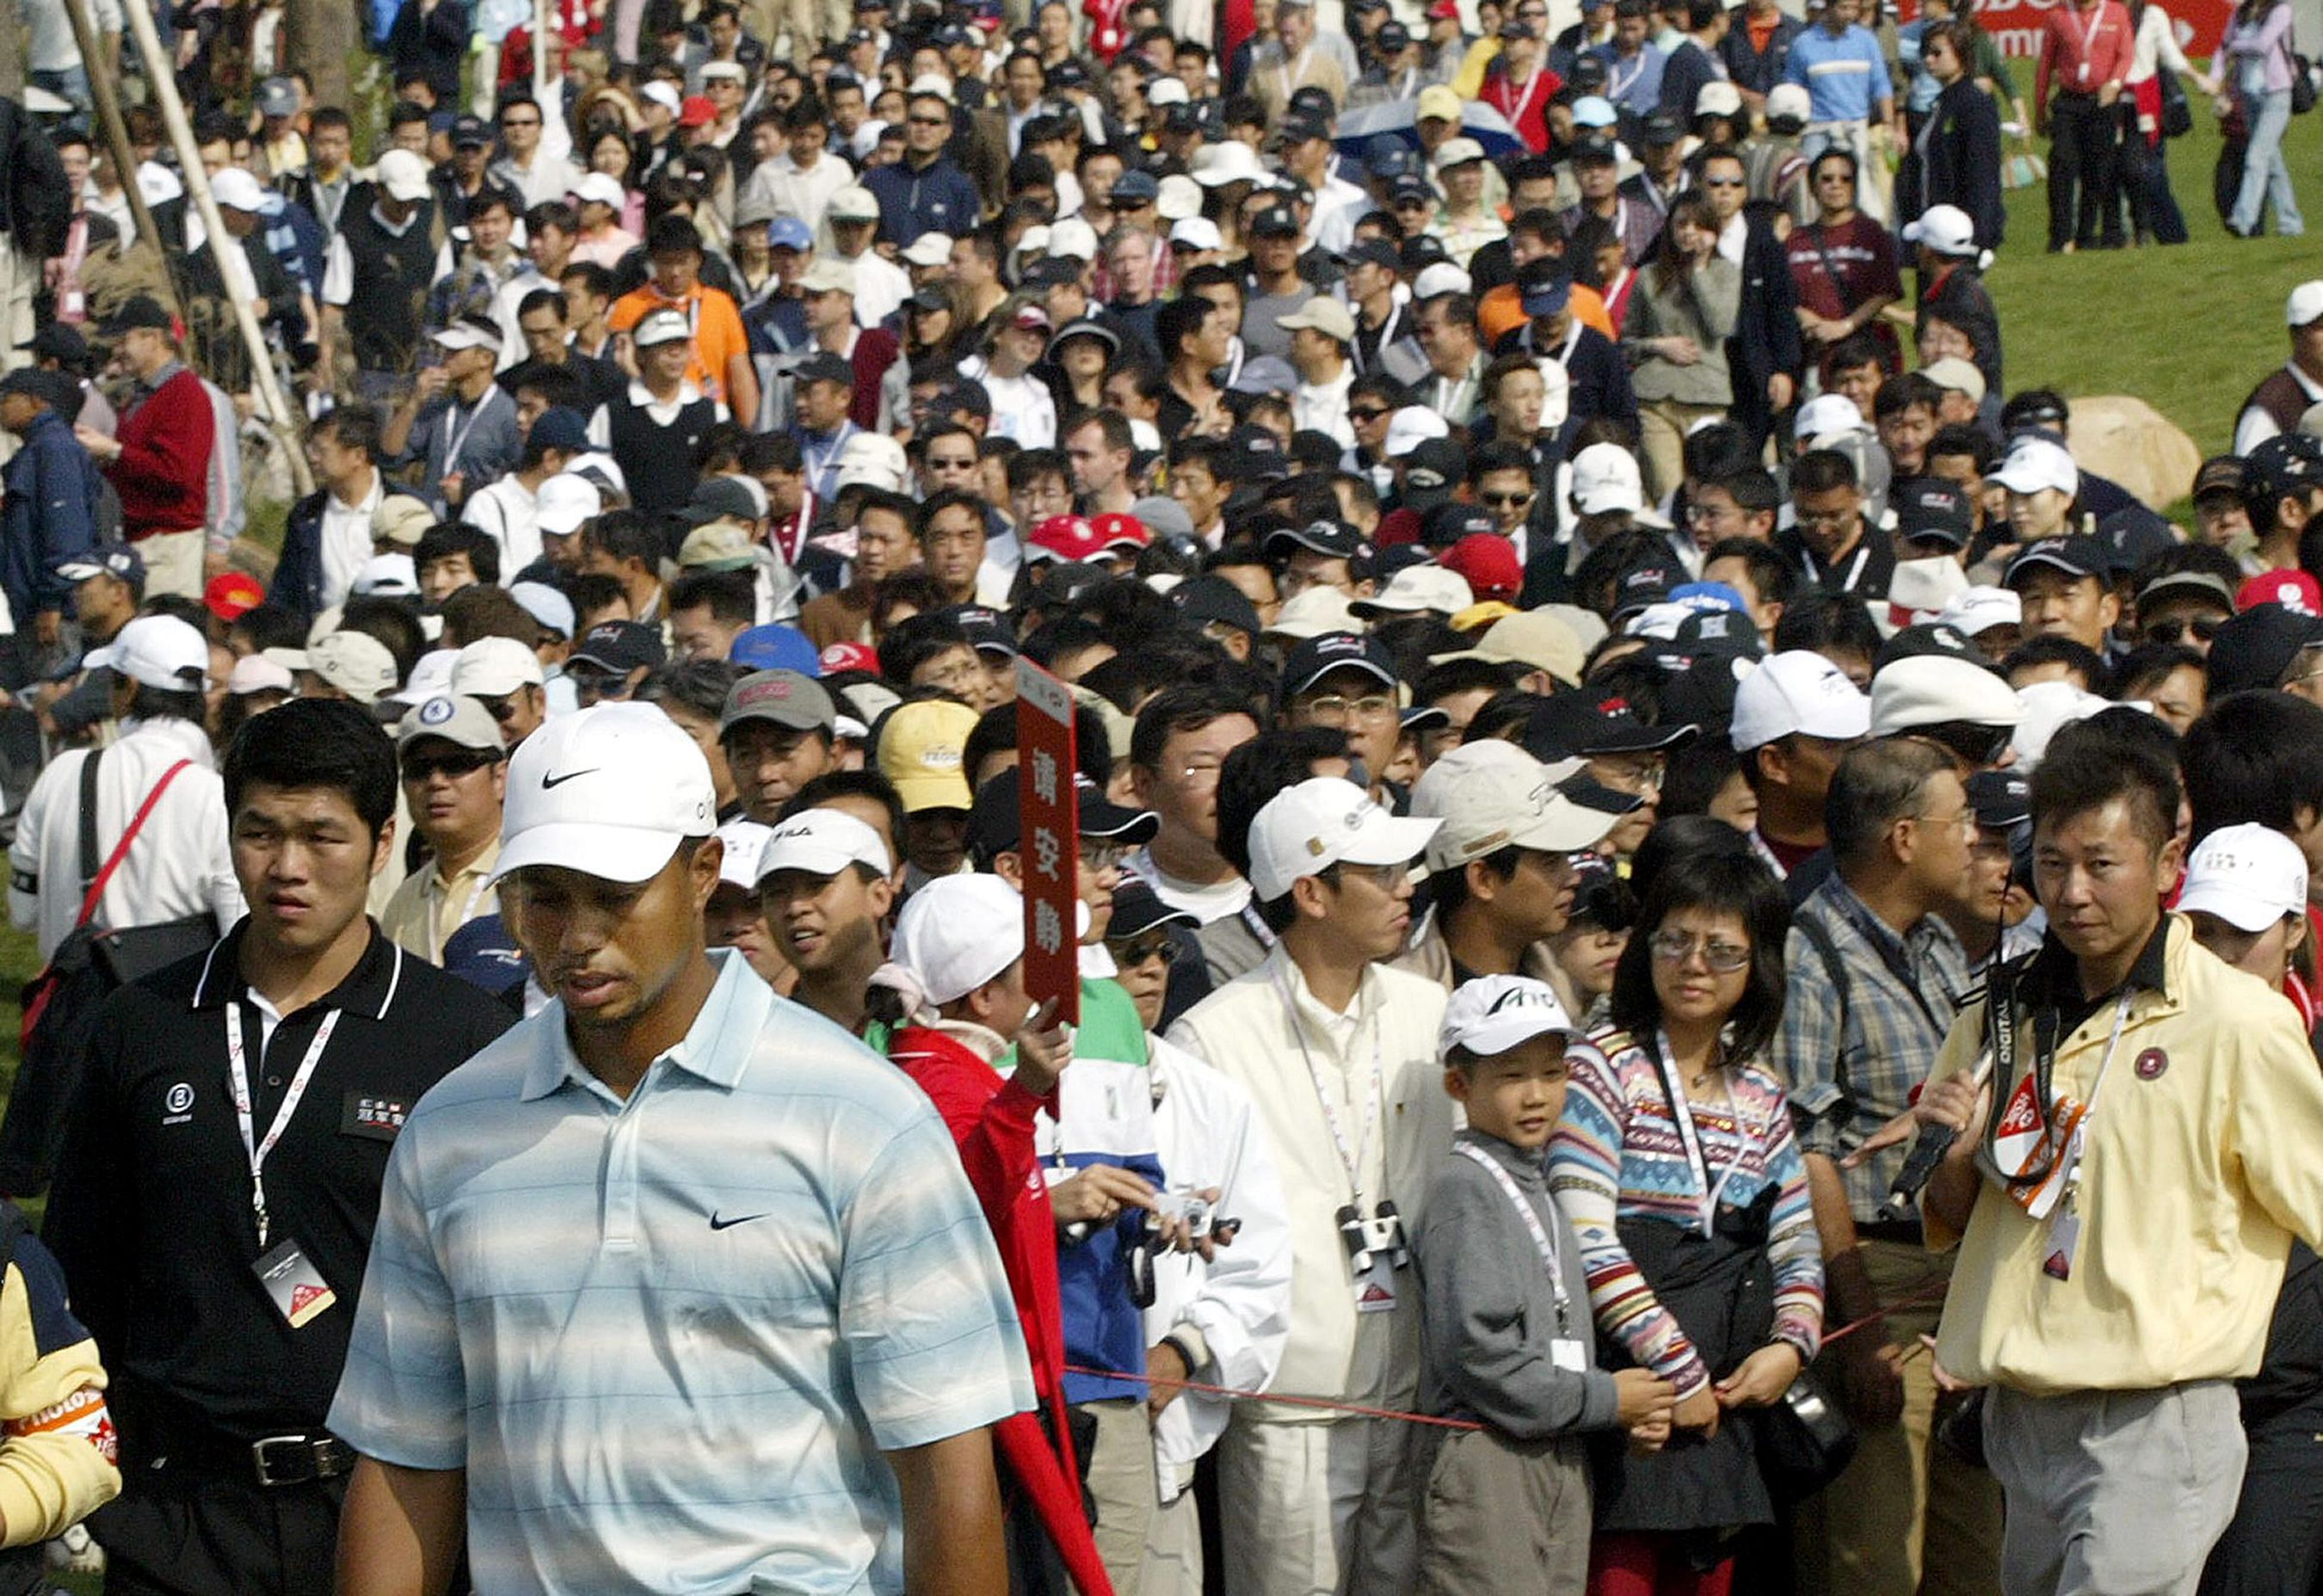 This file photo taken on November 12, 2005 shows US golfer Tiger Woods (front L, in white hat) being followed by a large crowd of Chinese spectators as he walks from the tee-off area during the HSBC Champions golf tournament in Shanghai. (Credit: AFP)